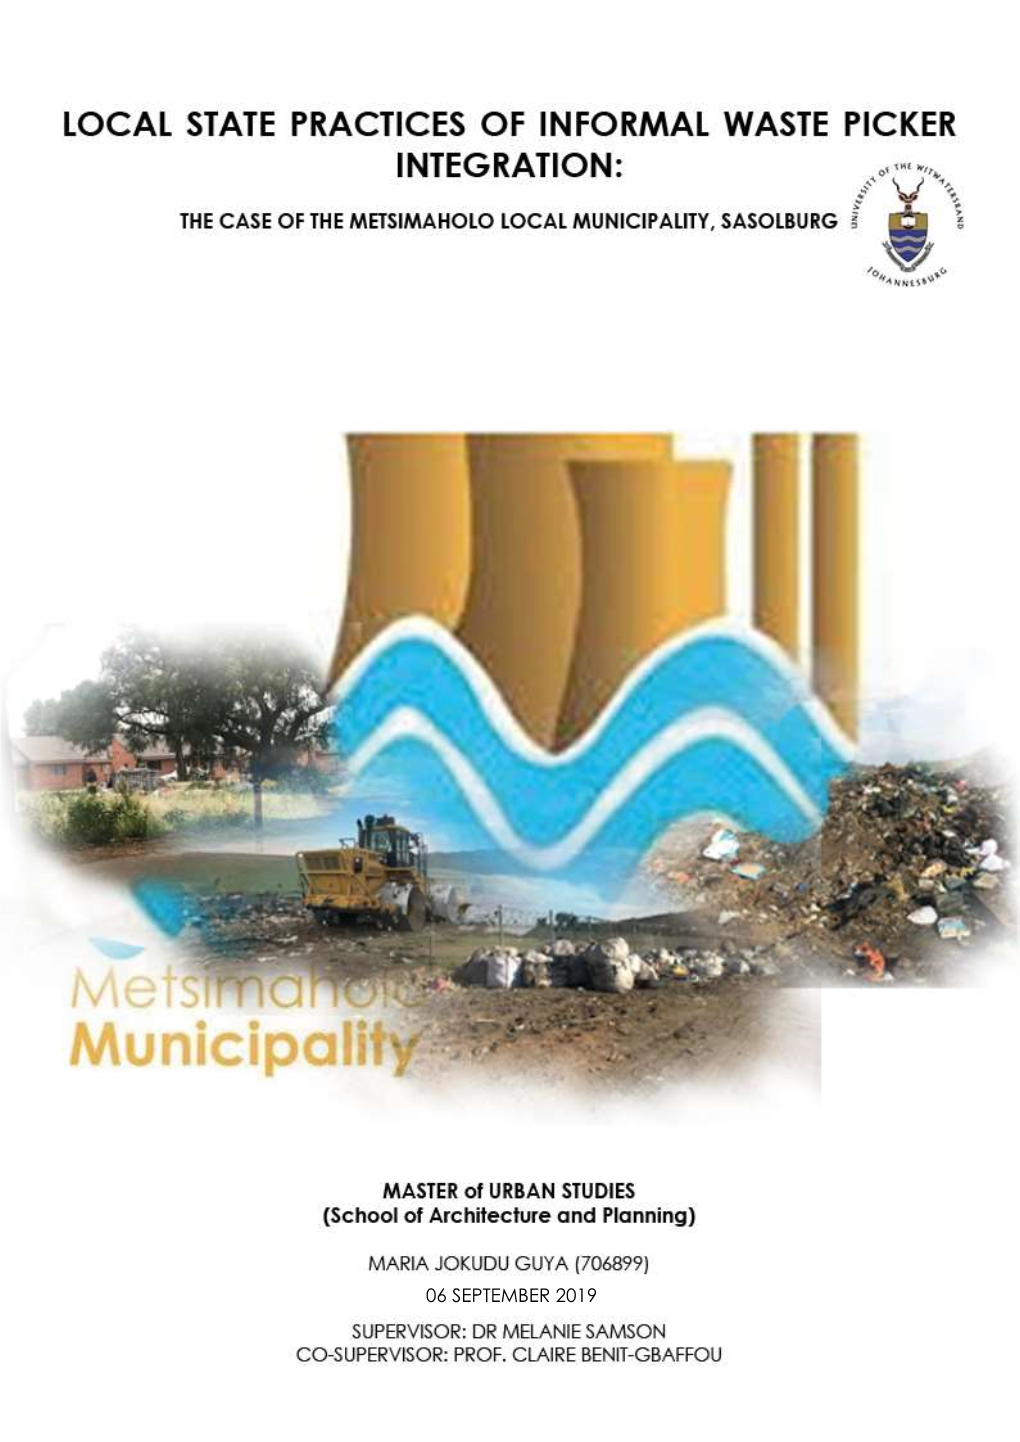 Local State Practices of Informal Waste Picker Integration: the Case of the Metsimaholo Local Municipality, Sasolburg